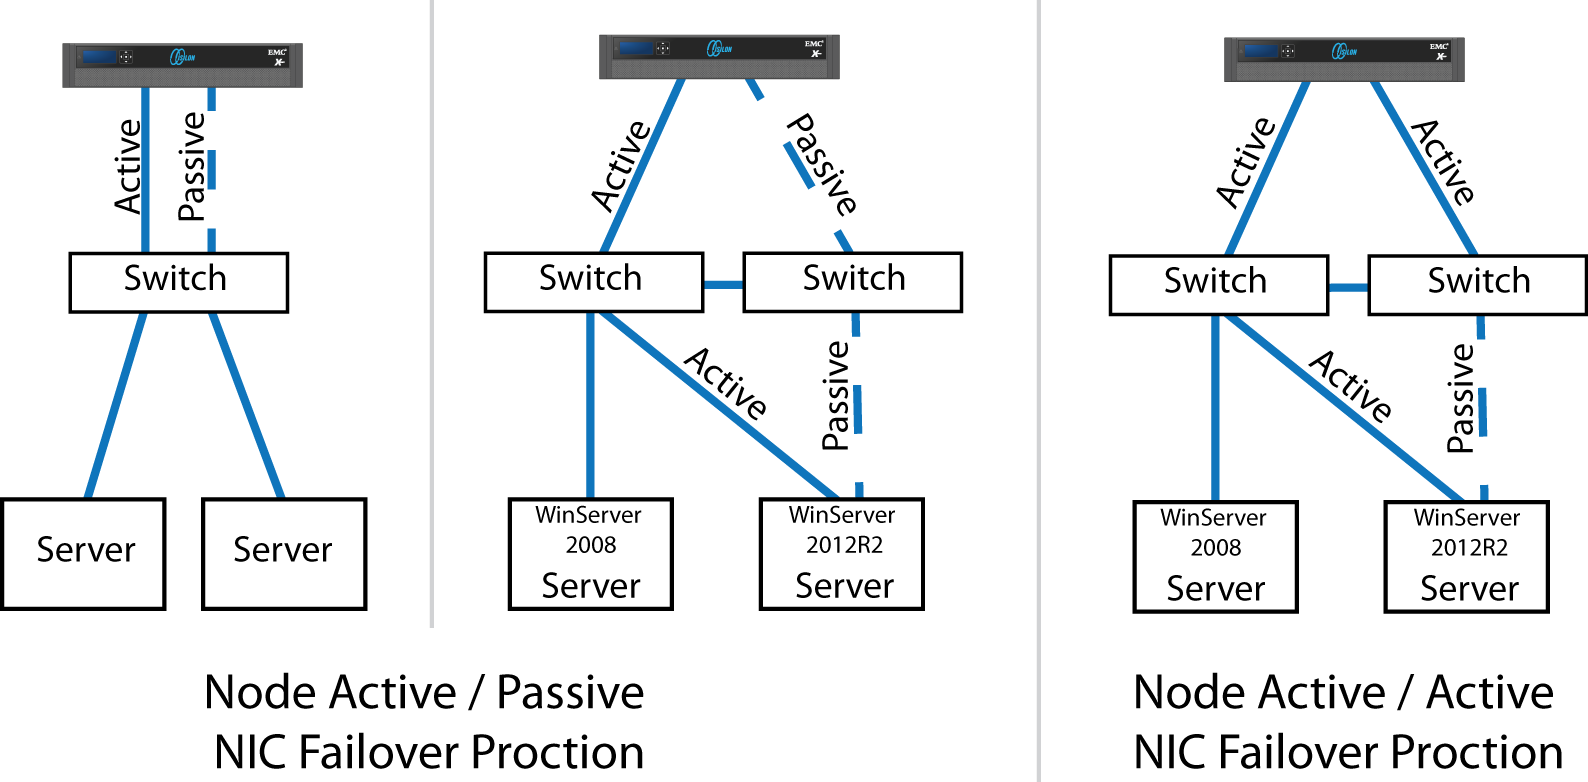 Image of Isilon Active/Passive and Active/Active configuration